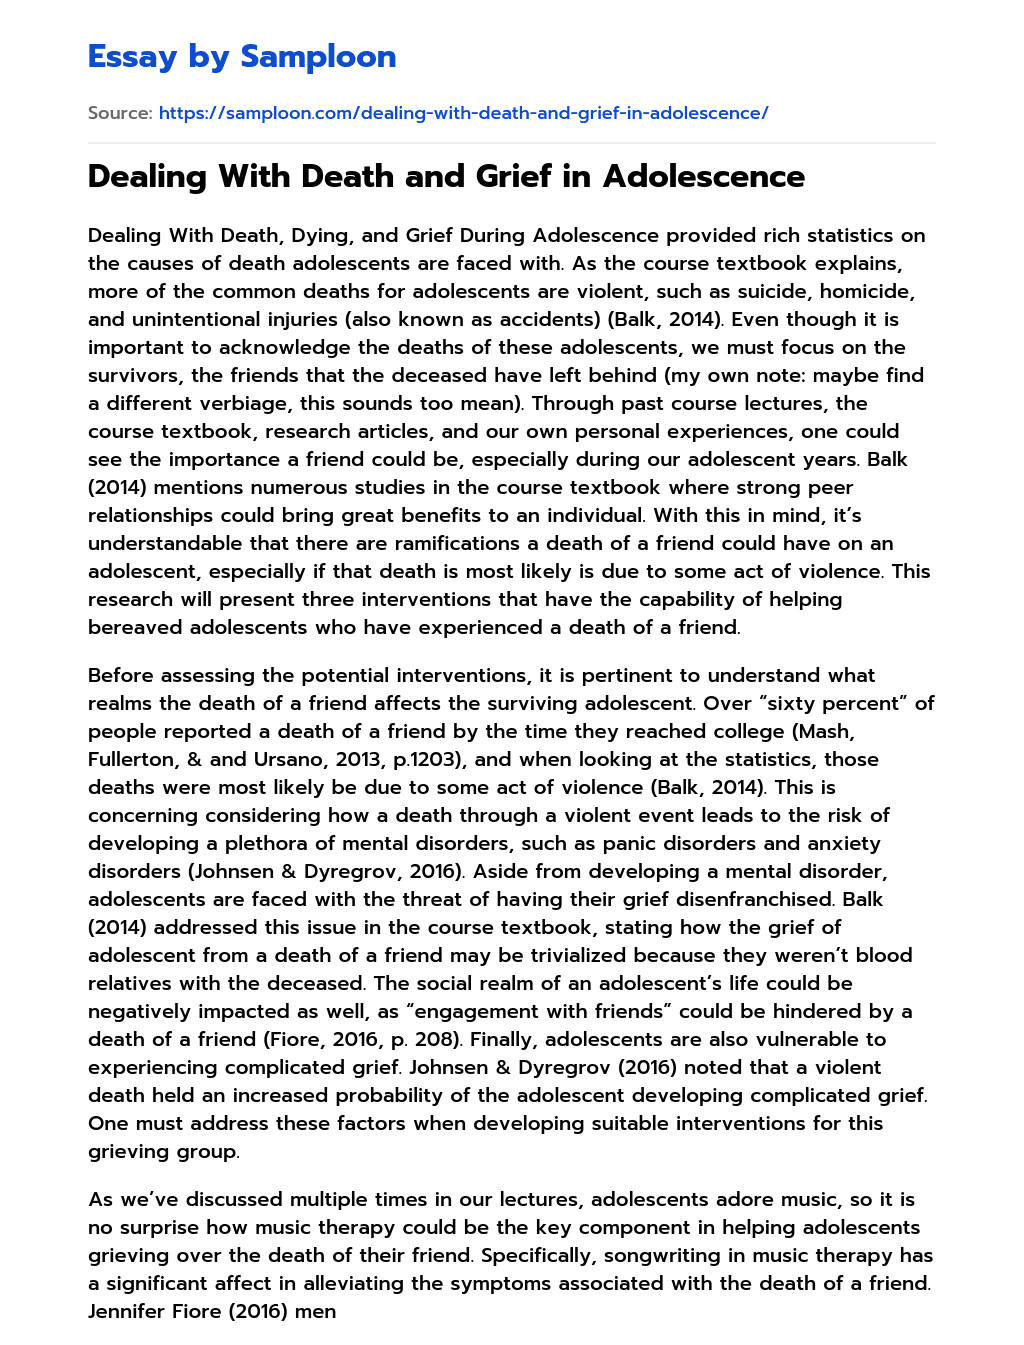 Dealing With Death and Grief in Adolescence essay